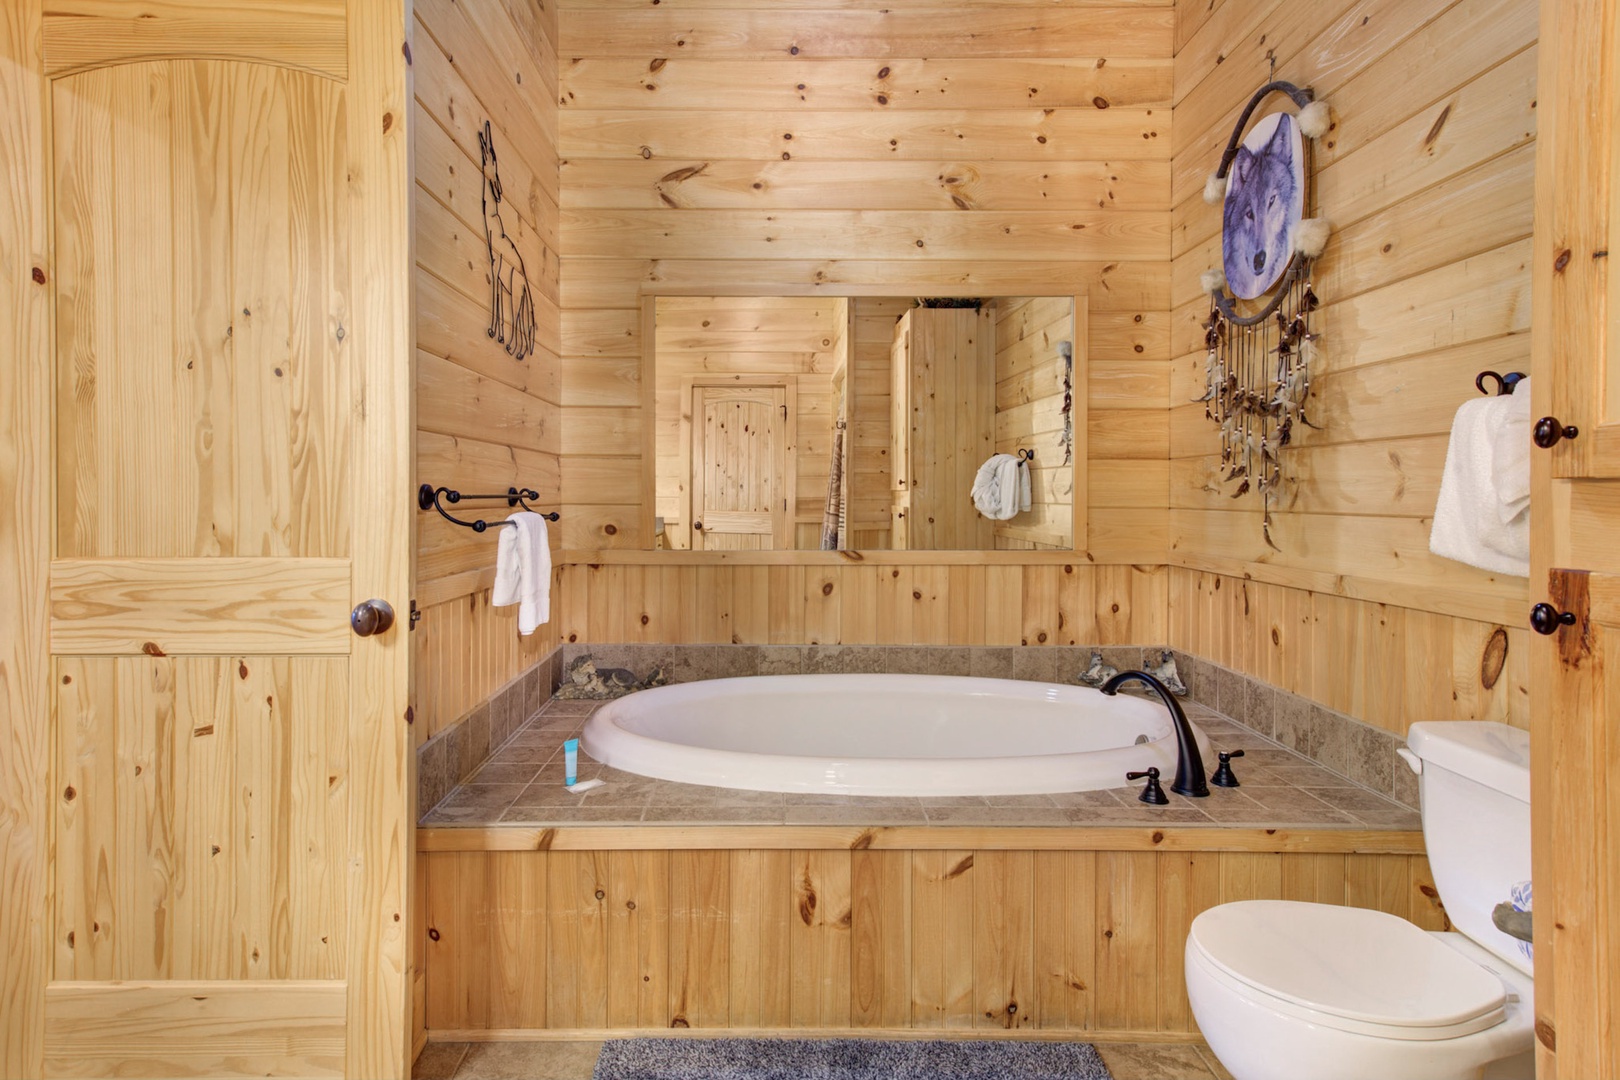 This Jack & Jill ensuite includes a single vanity, soaking tub, & shower